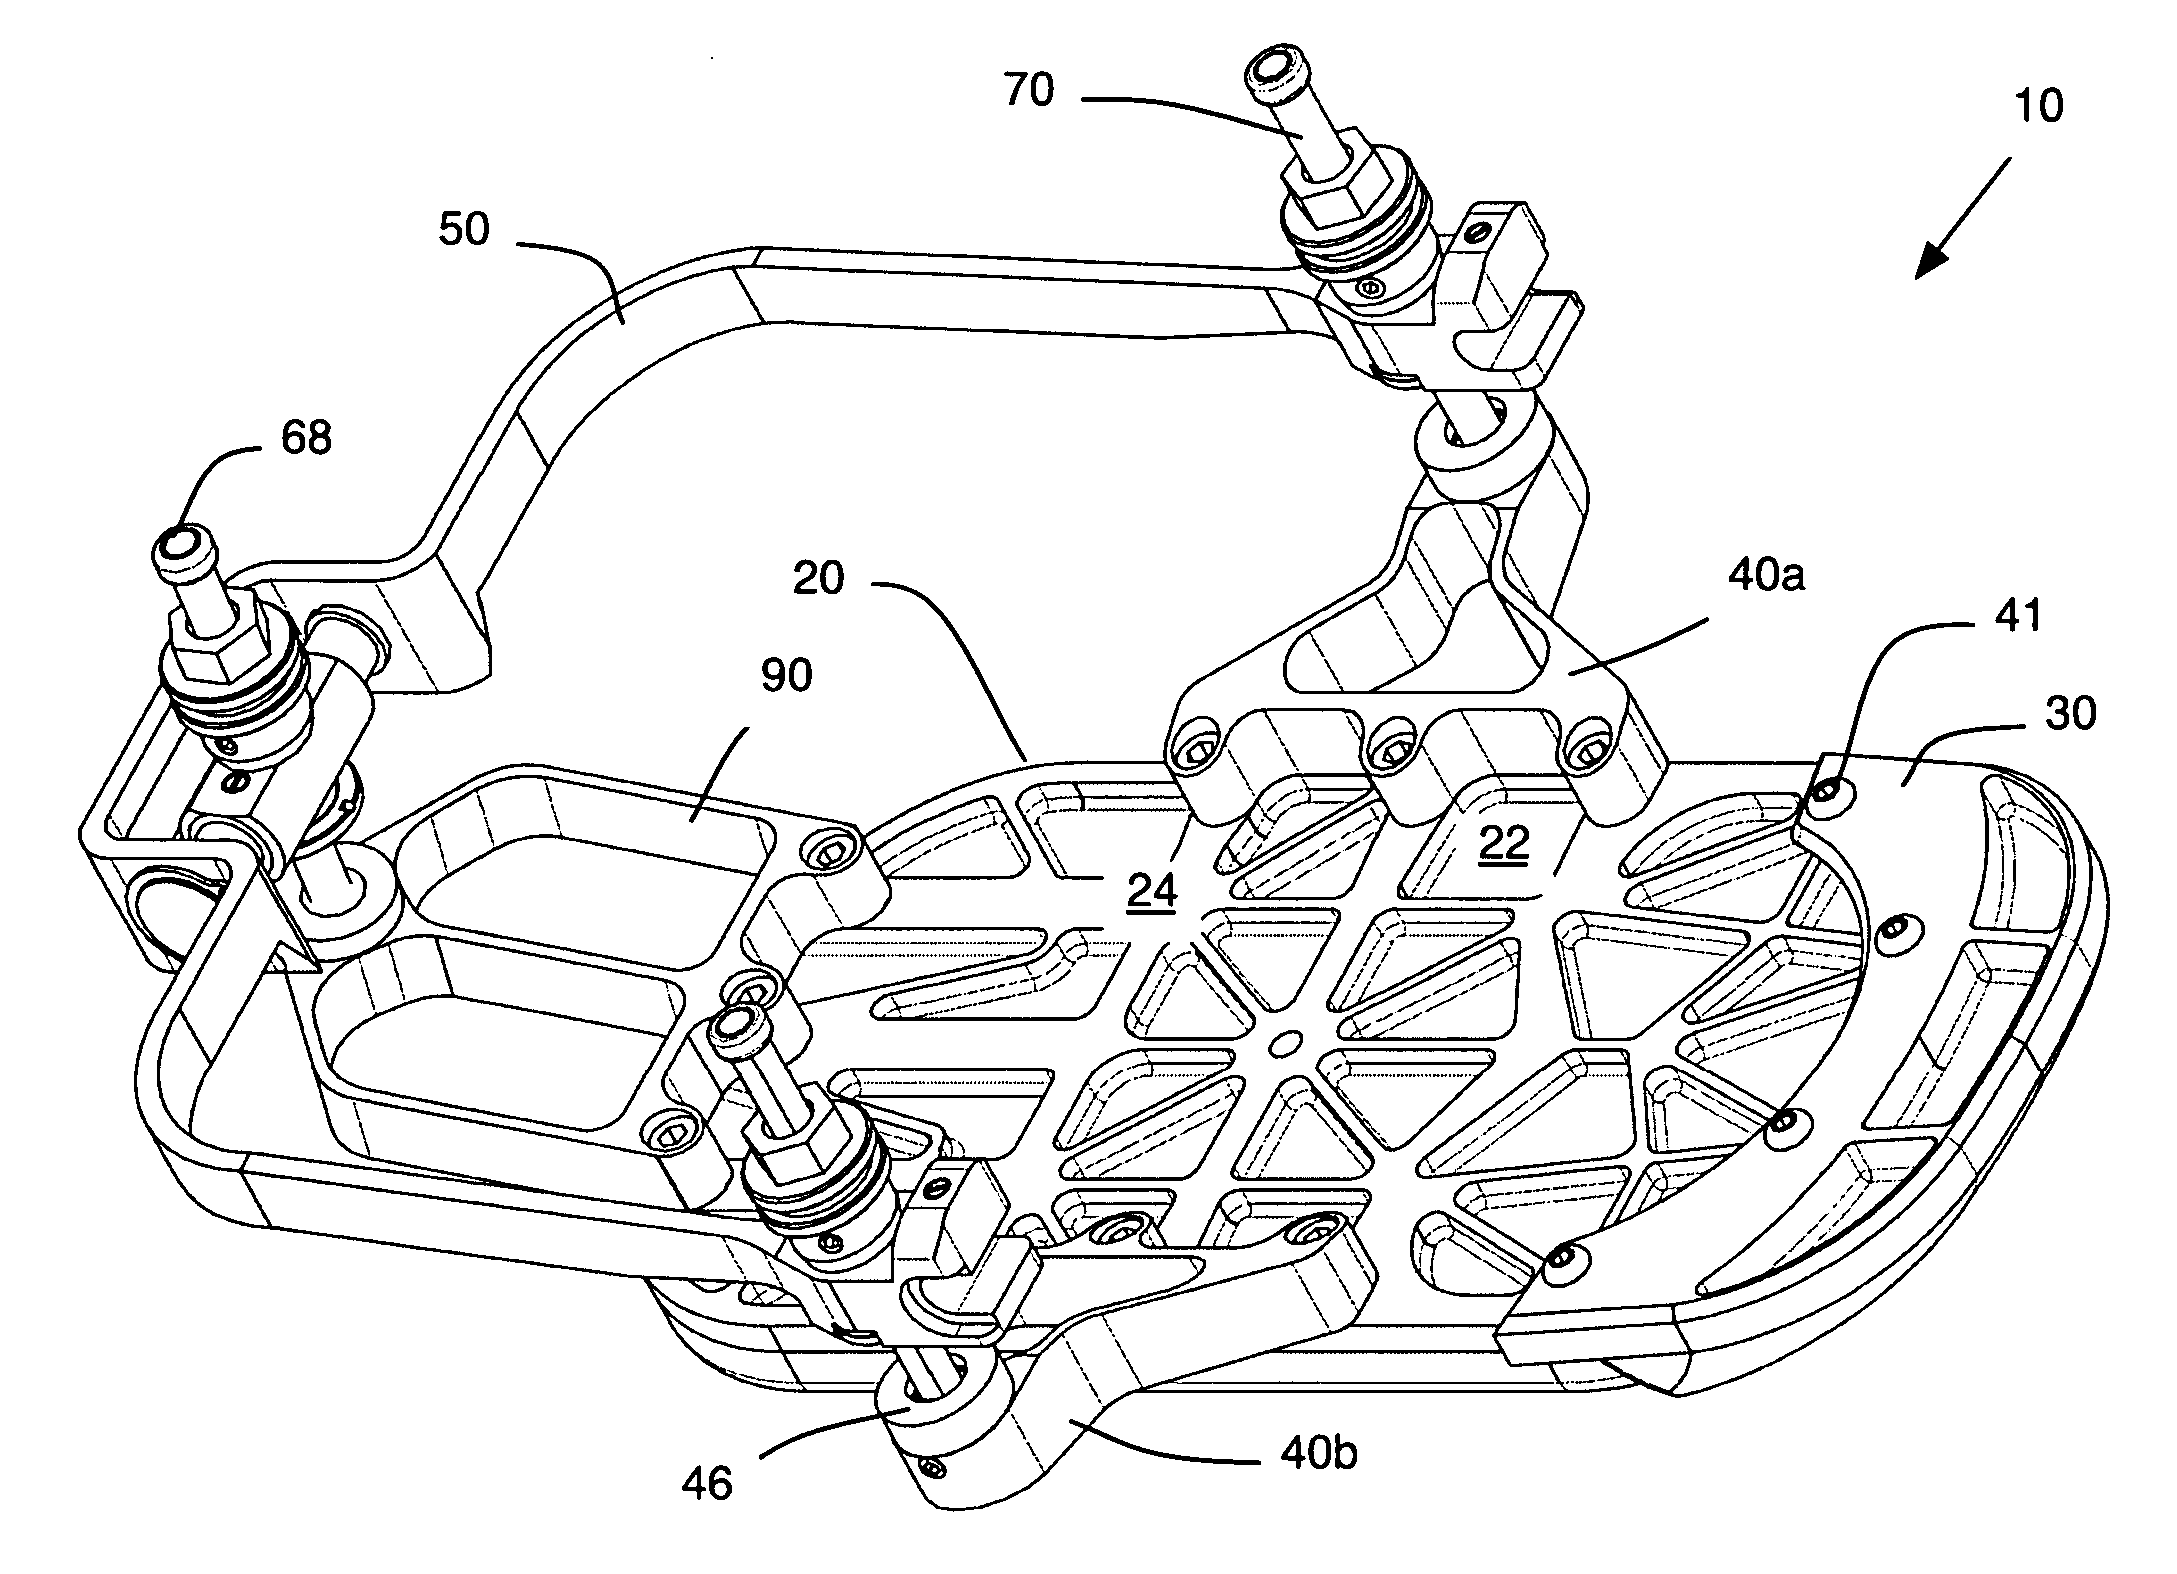 External fixation and foot-supporting device